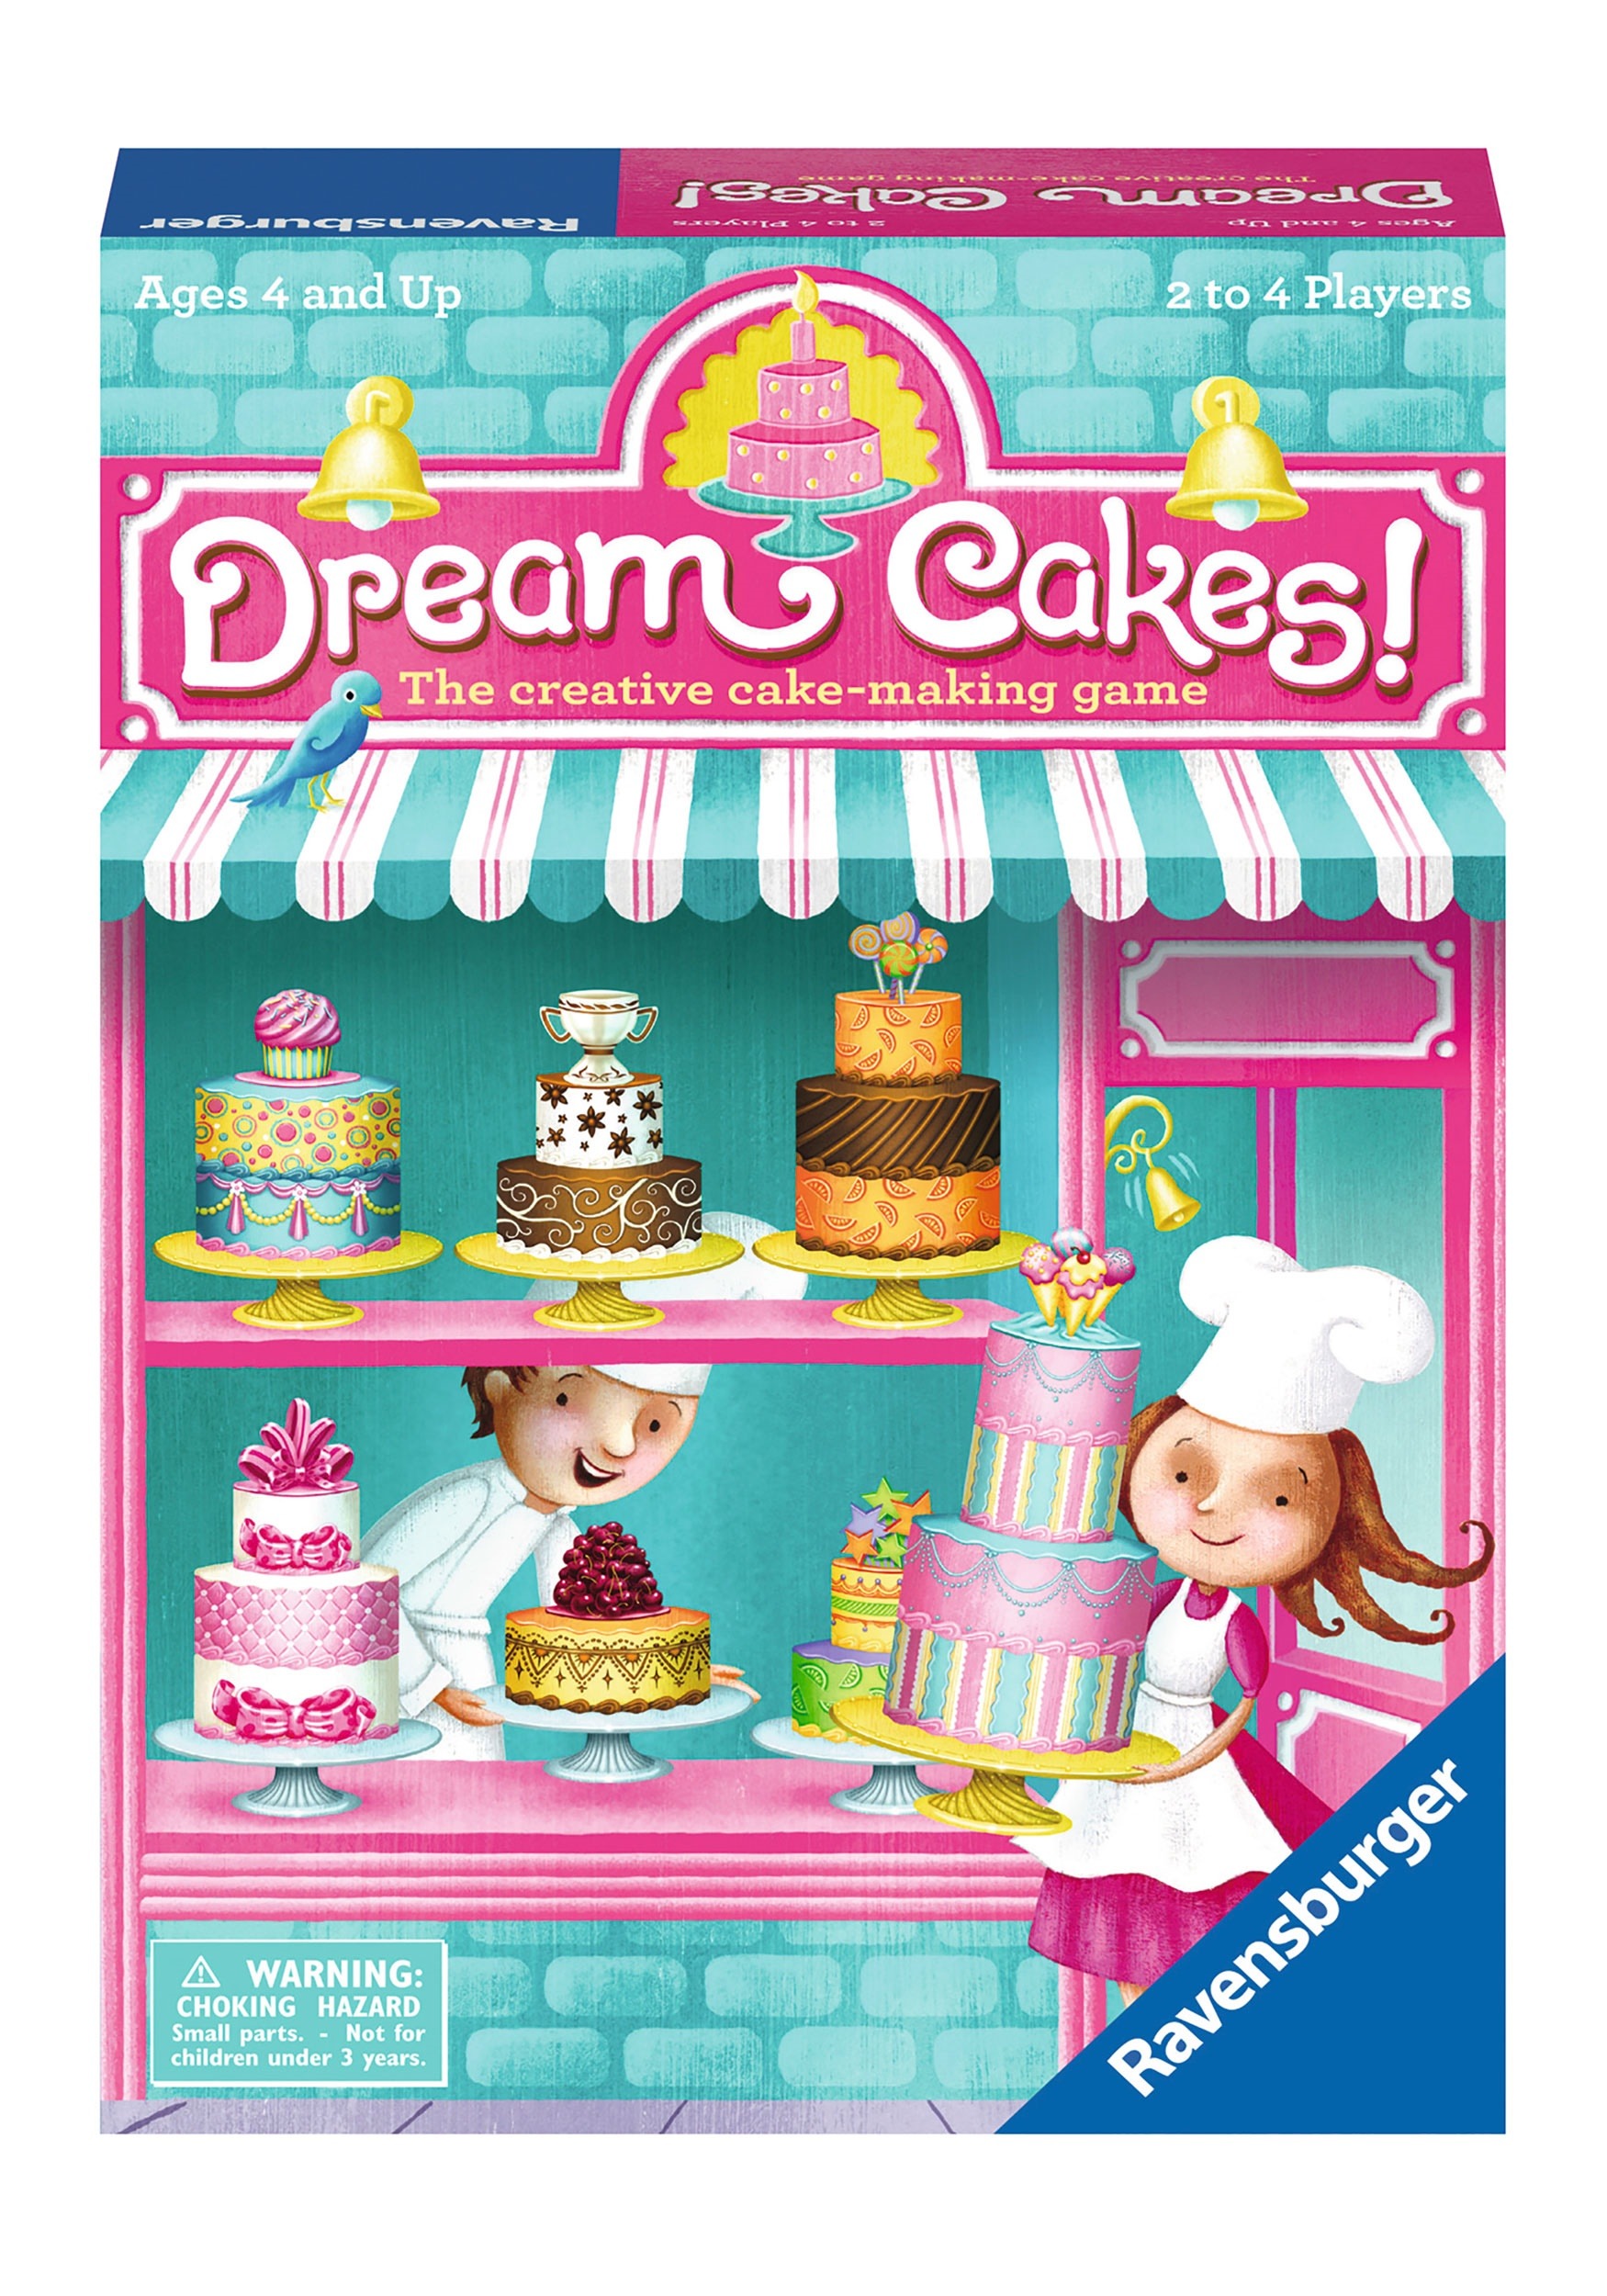 Dream Cakes: The Creative Cake-Making Game! for Adults and Kids